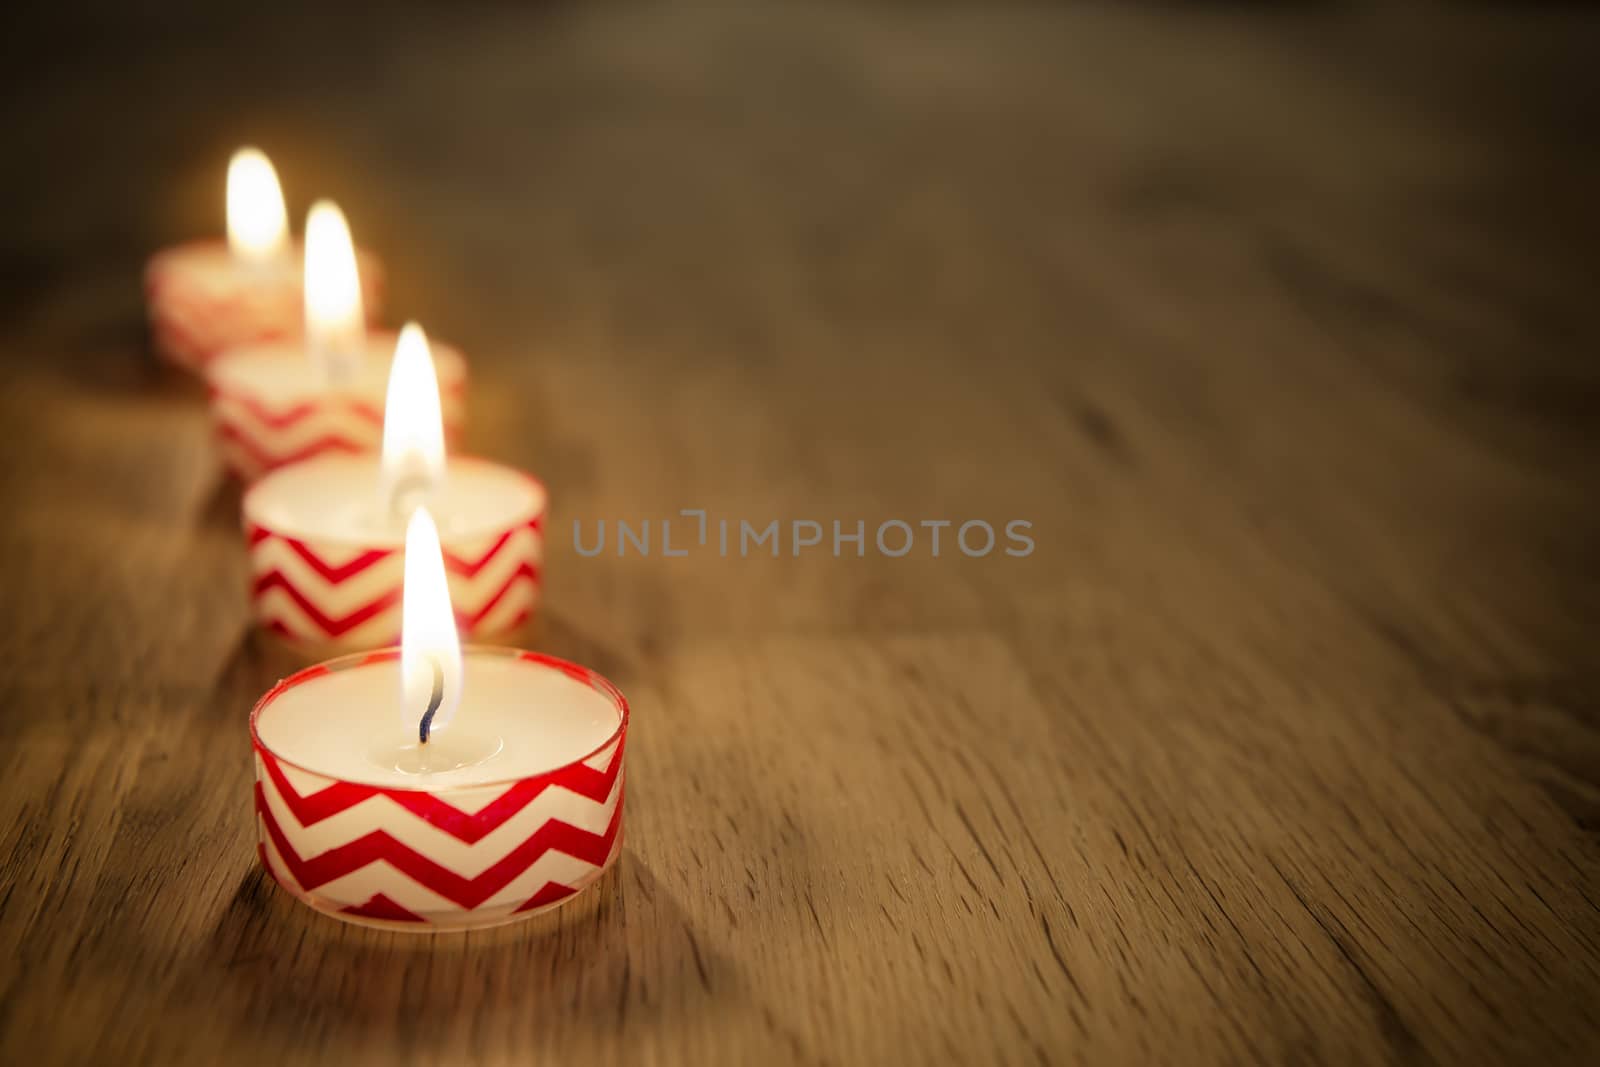 Romantic image of candles on a wooden table